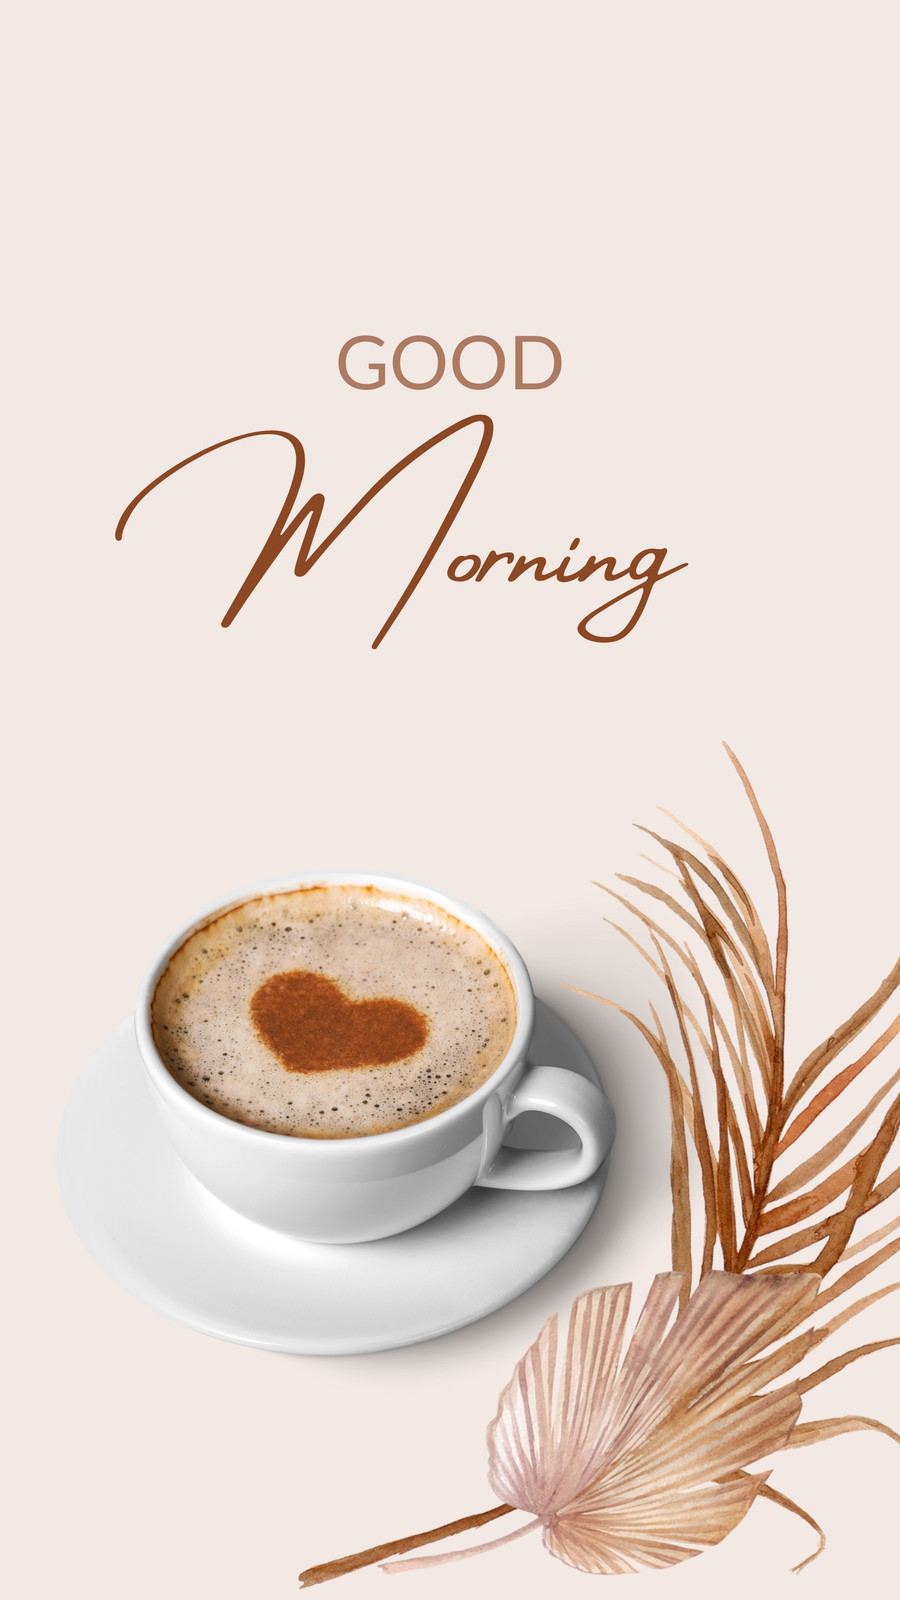 Page 13 - Free and customizable good morning wallpaper templates